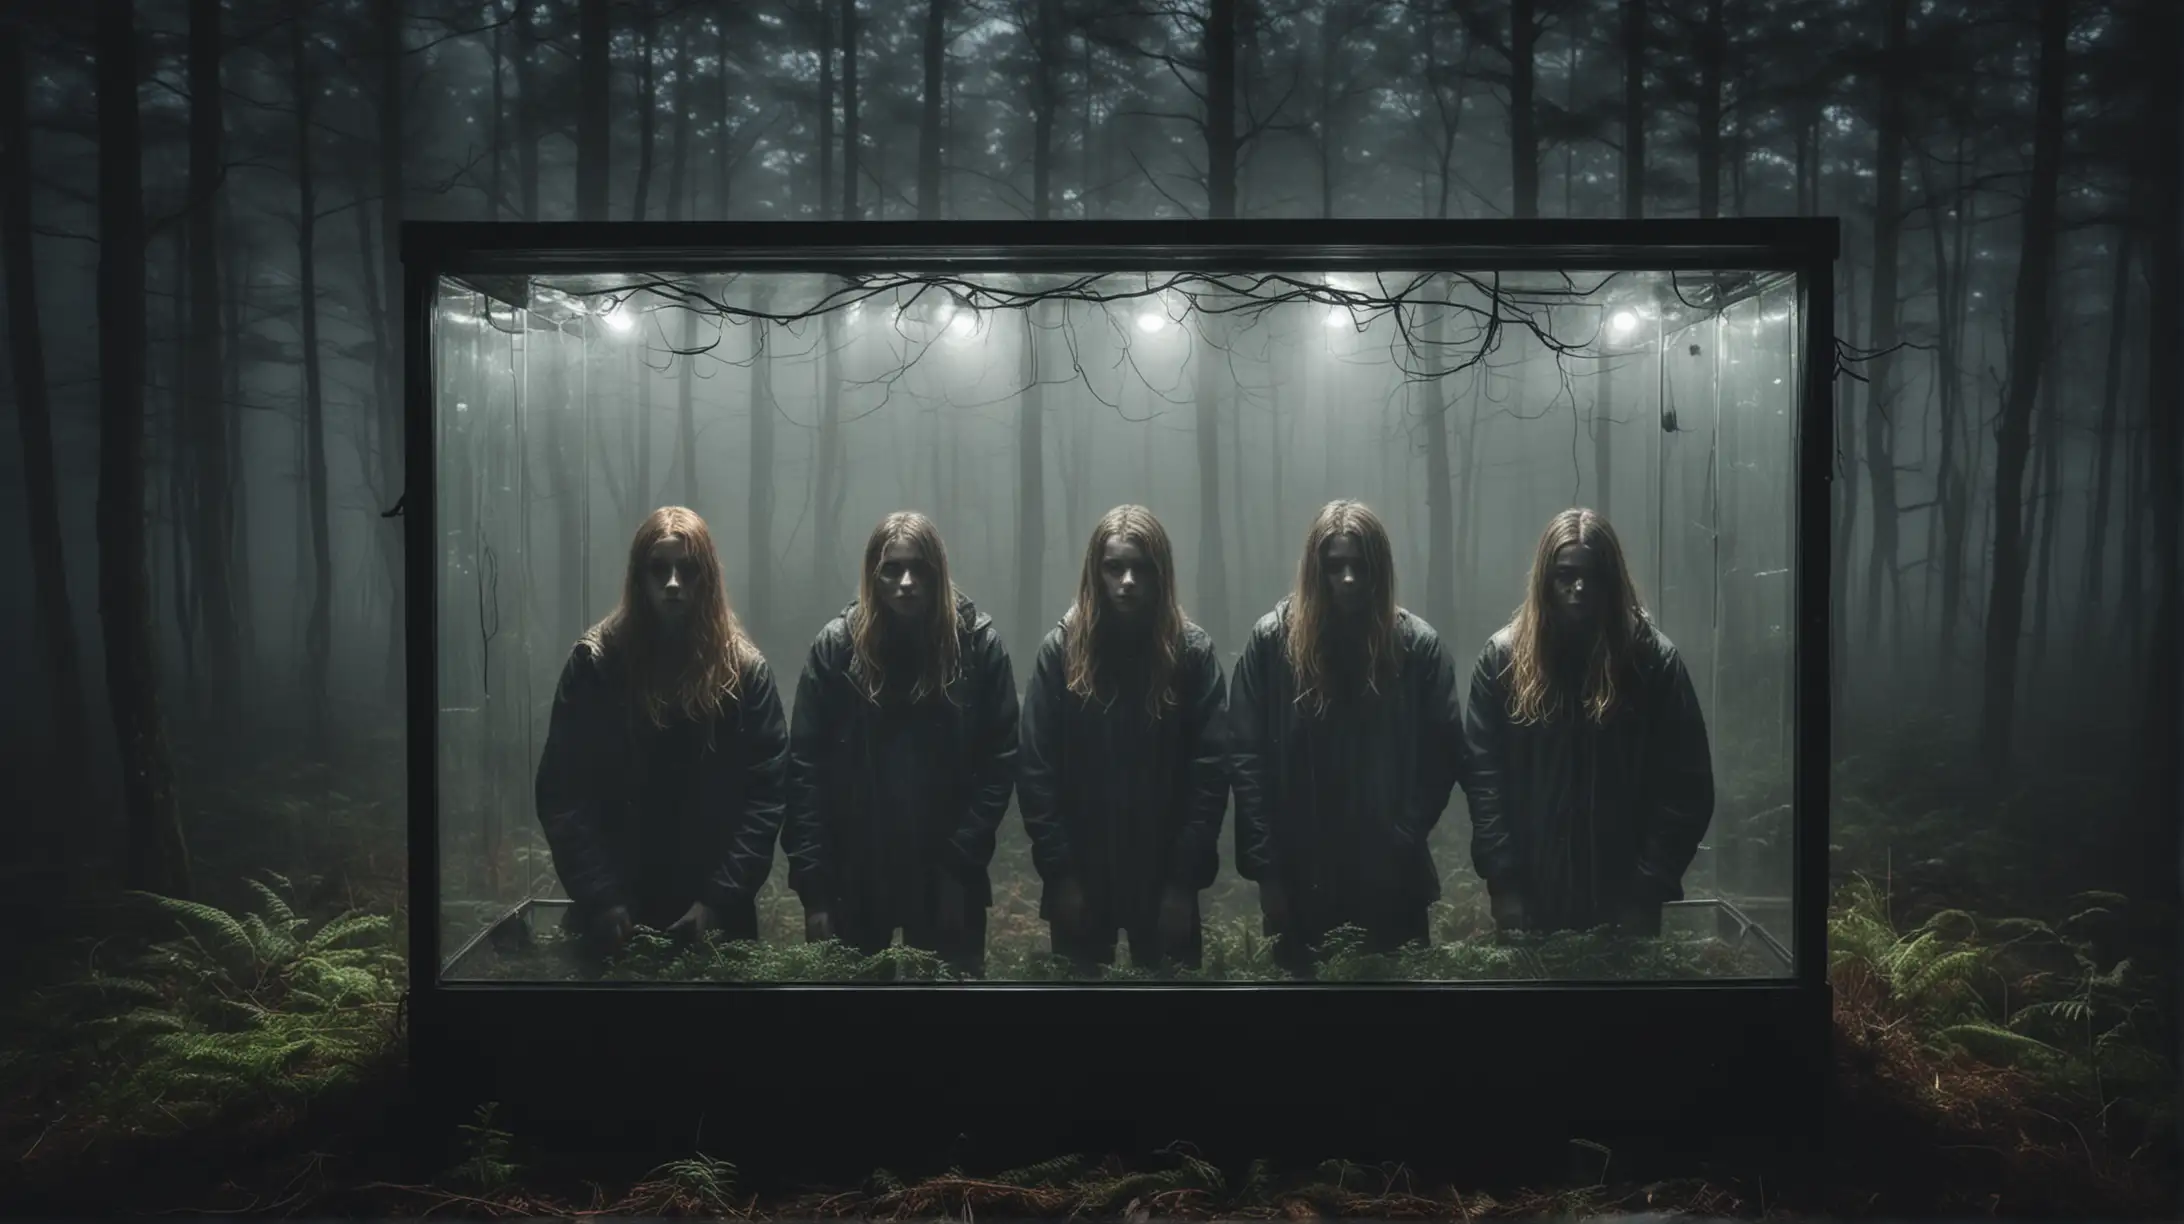  4 people in a glass box with lights on looking towards the picture. 
 

Very dark scary and foggy Forrest background .   Make it disturbing and nerve racking